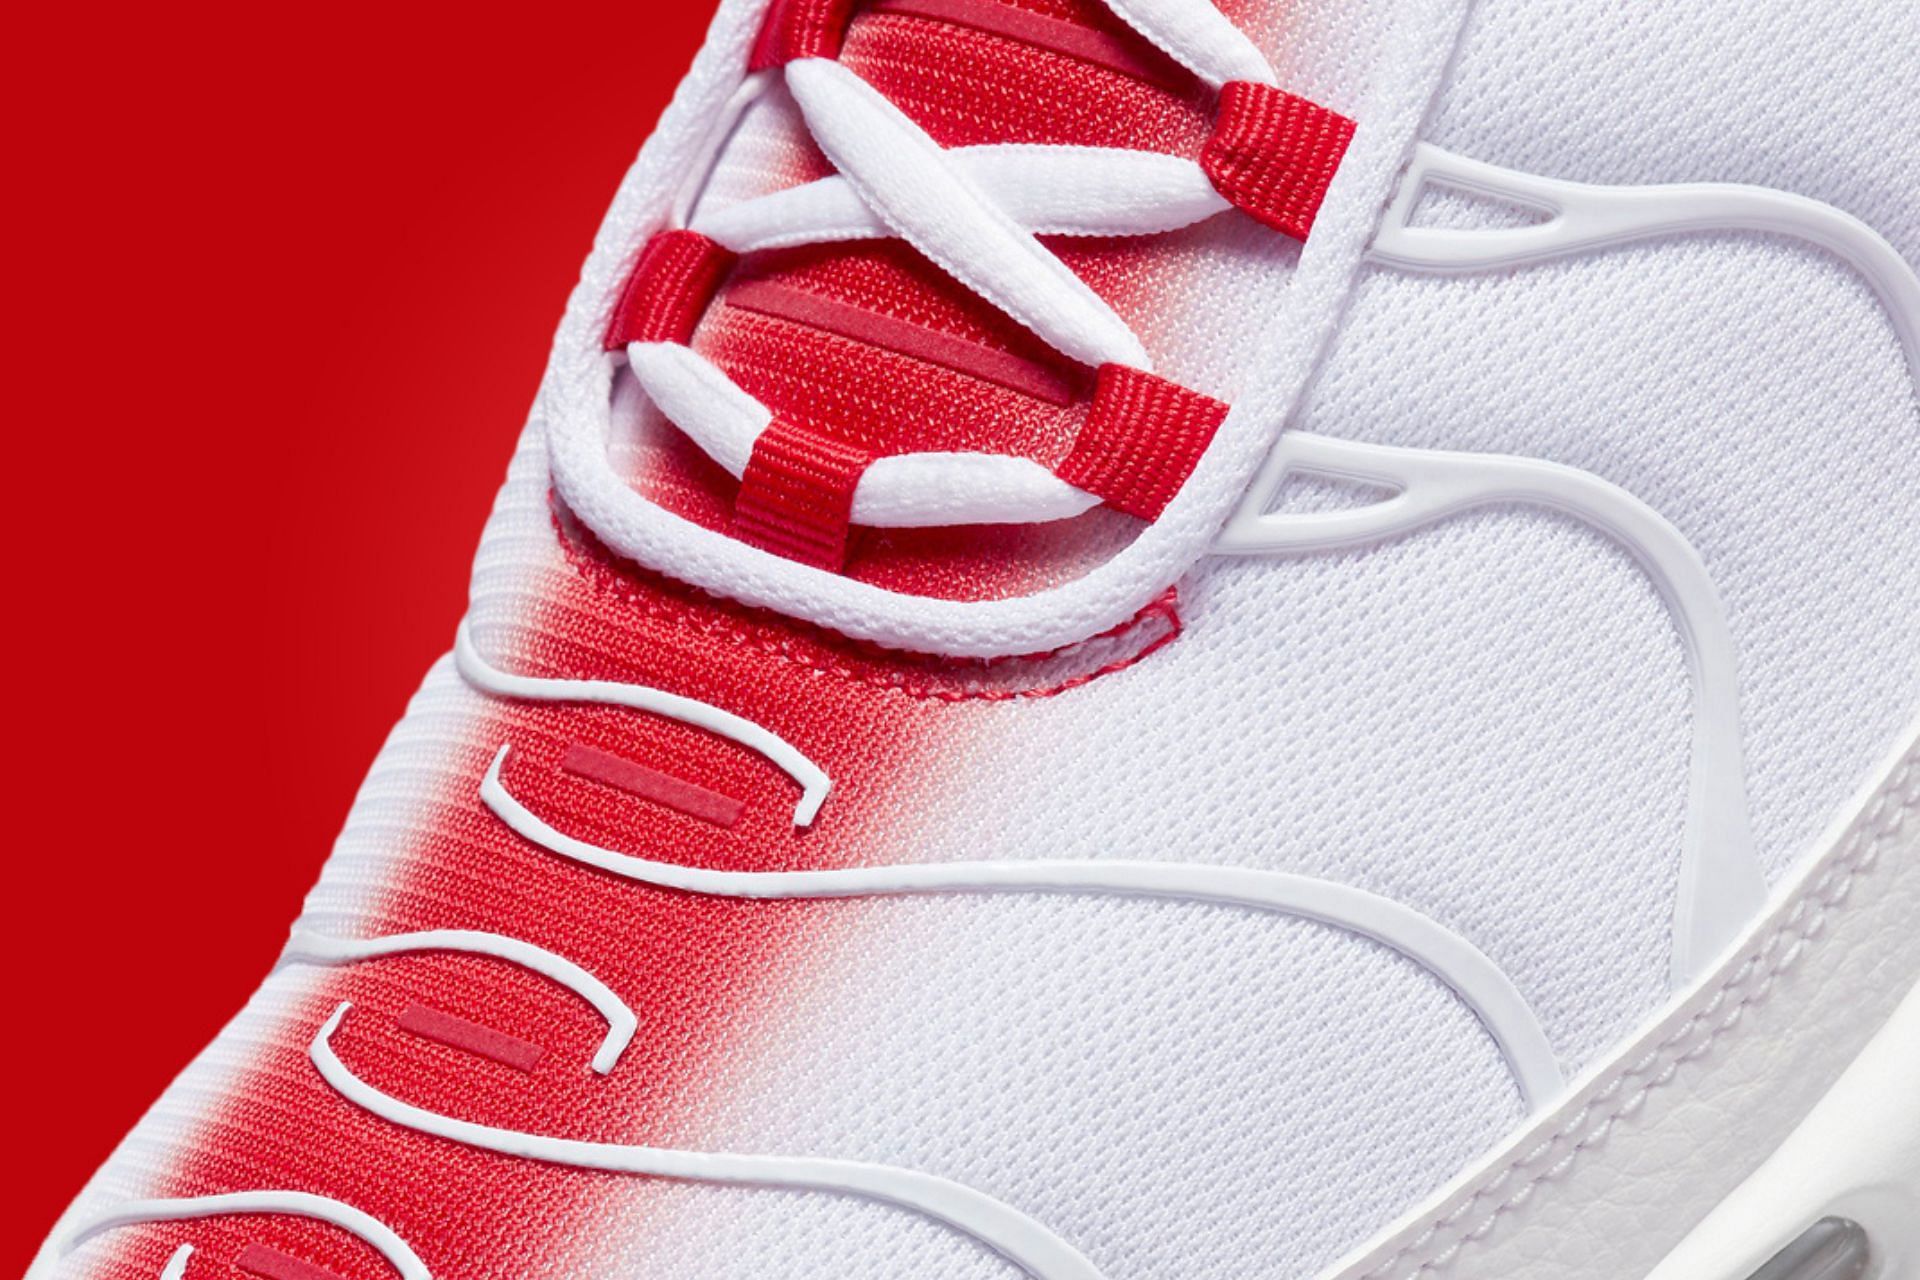 Here&rsquo;s a detailed look at the toe and tongue areas of the shoe (Image via Nike)